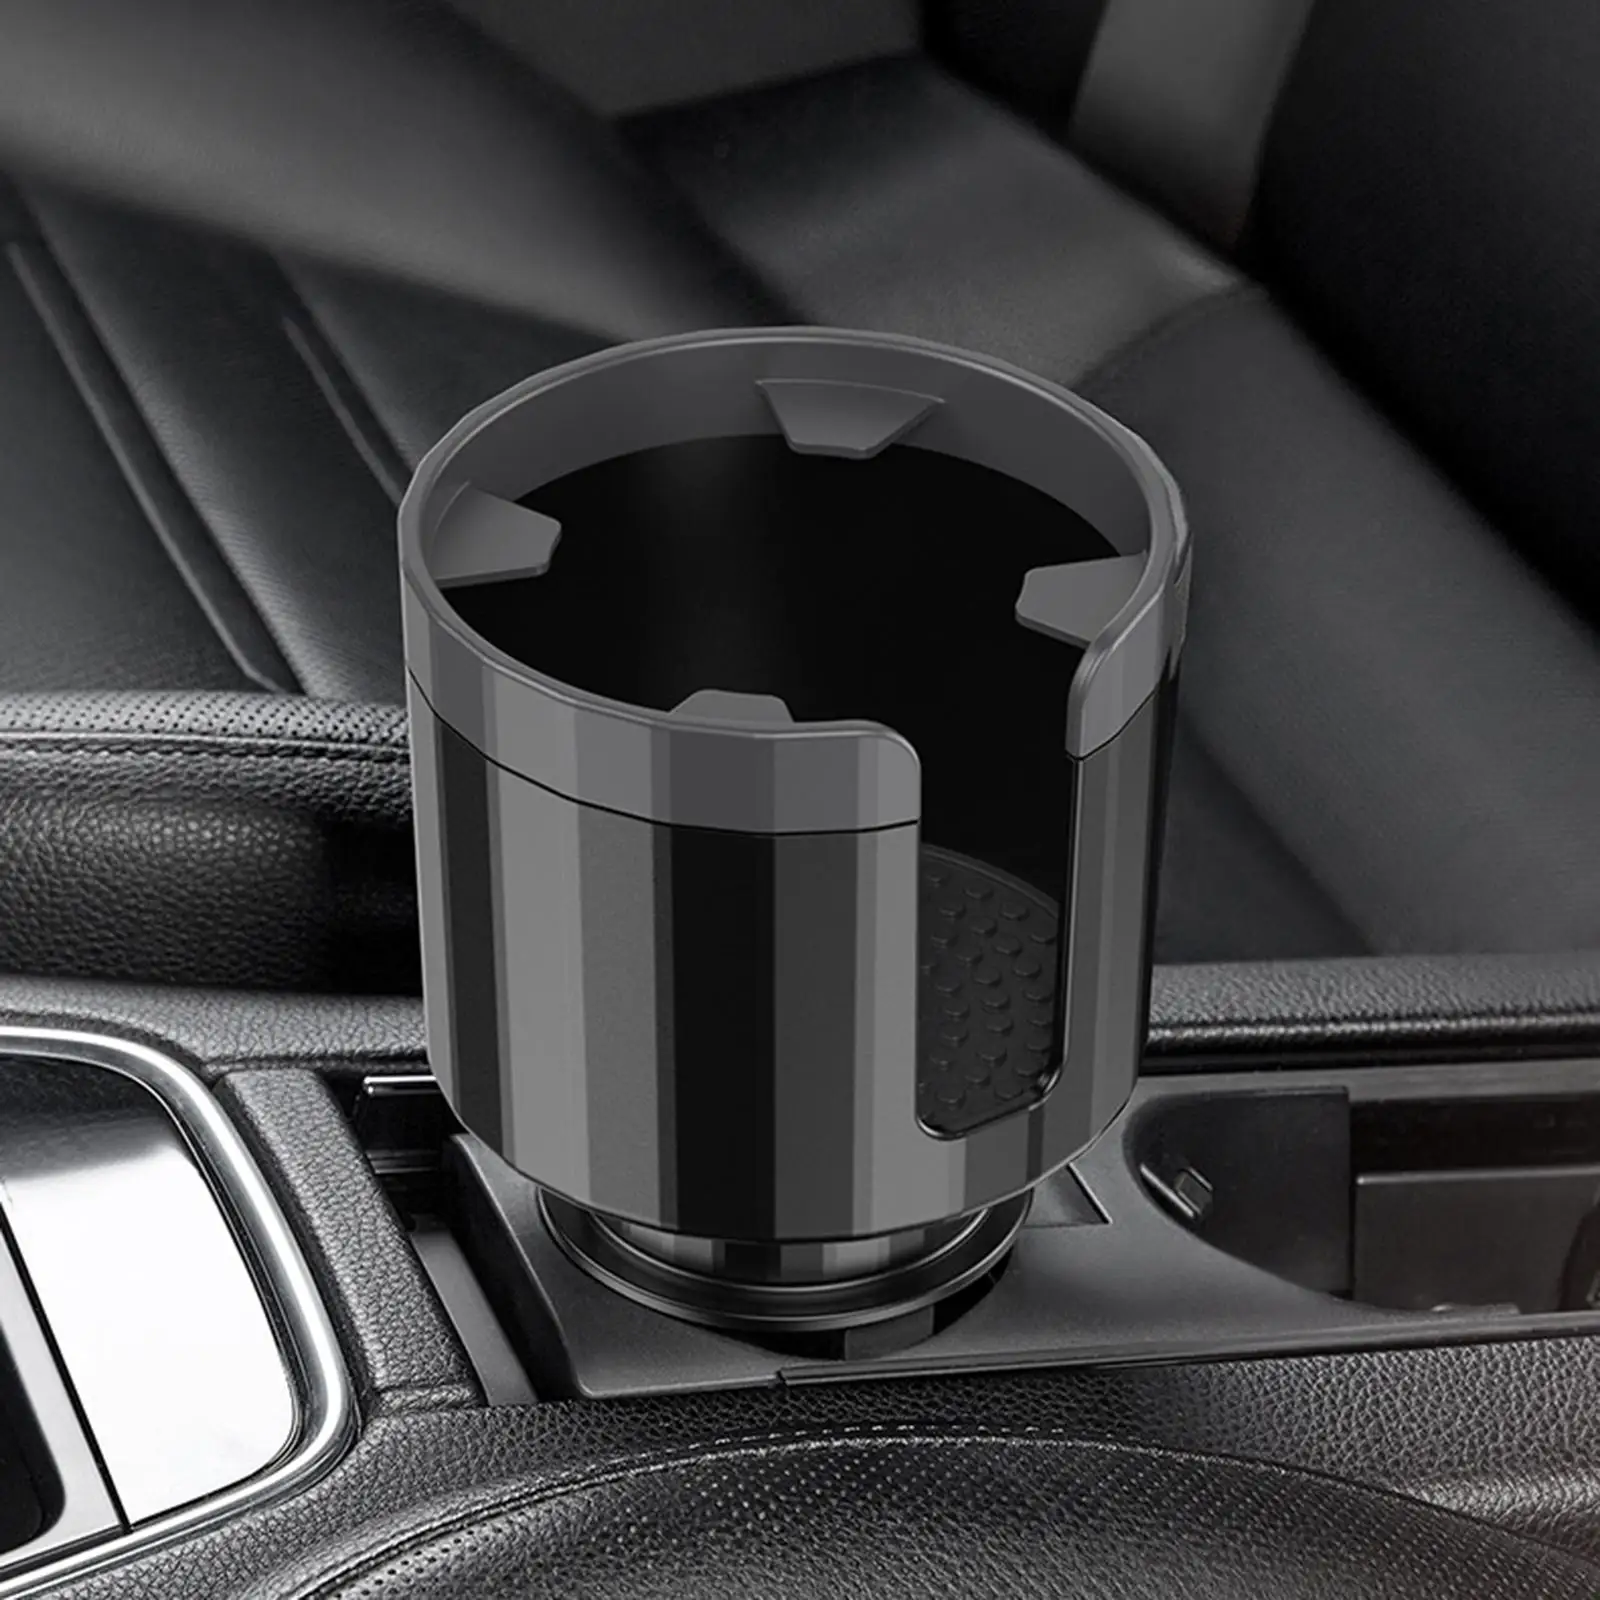 Car Cup Holder Expander Adapter Water Cup Holder with Adjustable Base for Cups